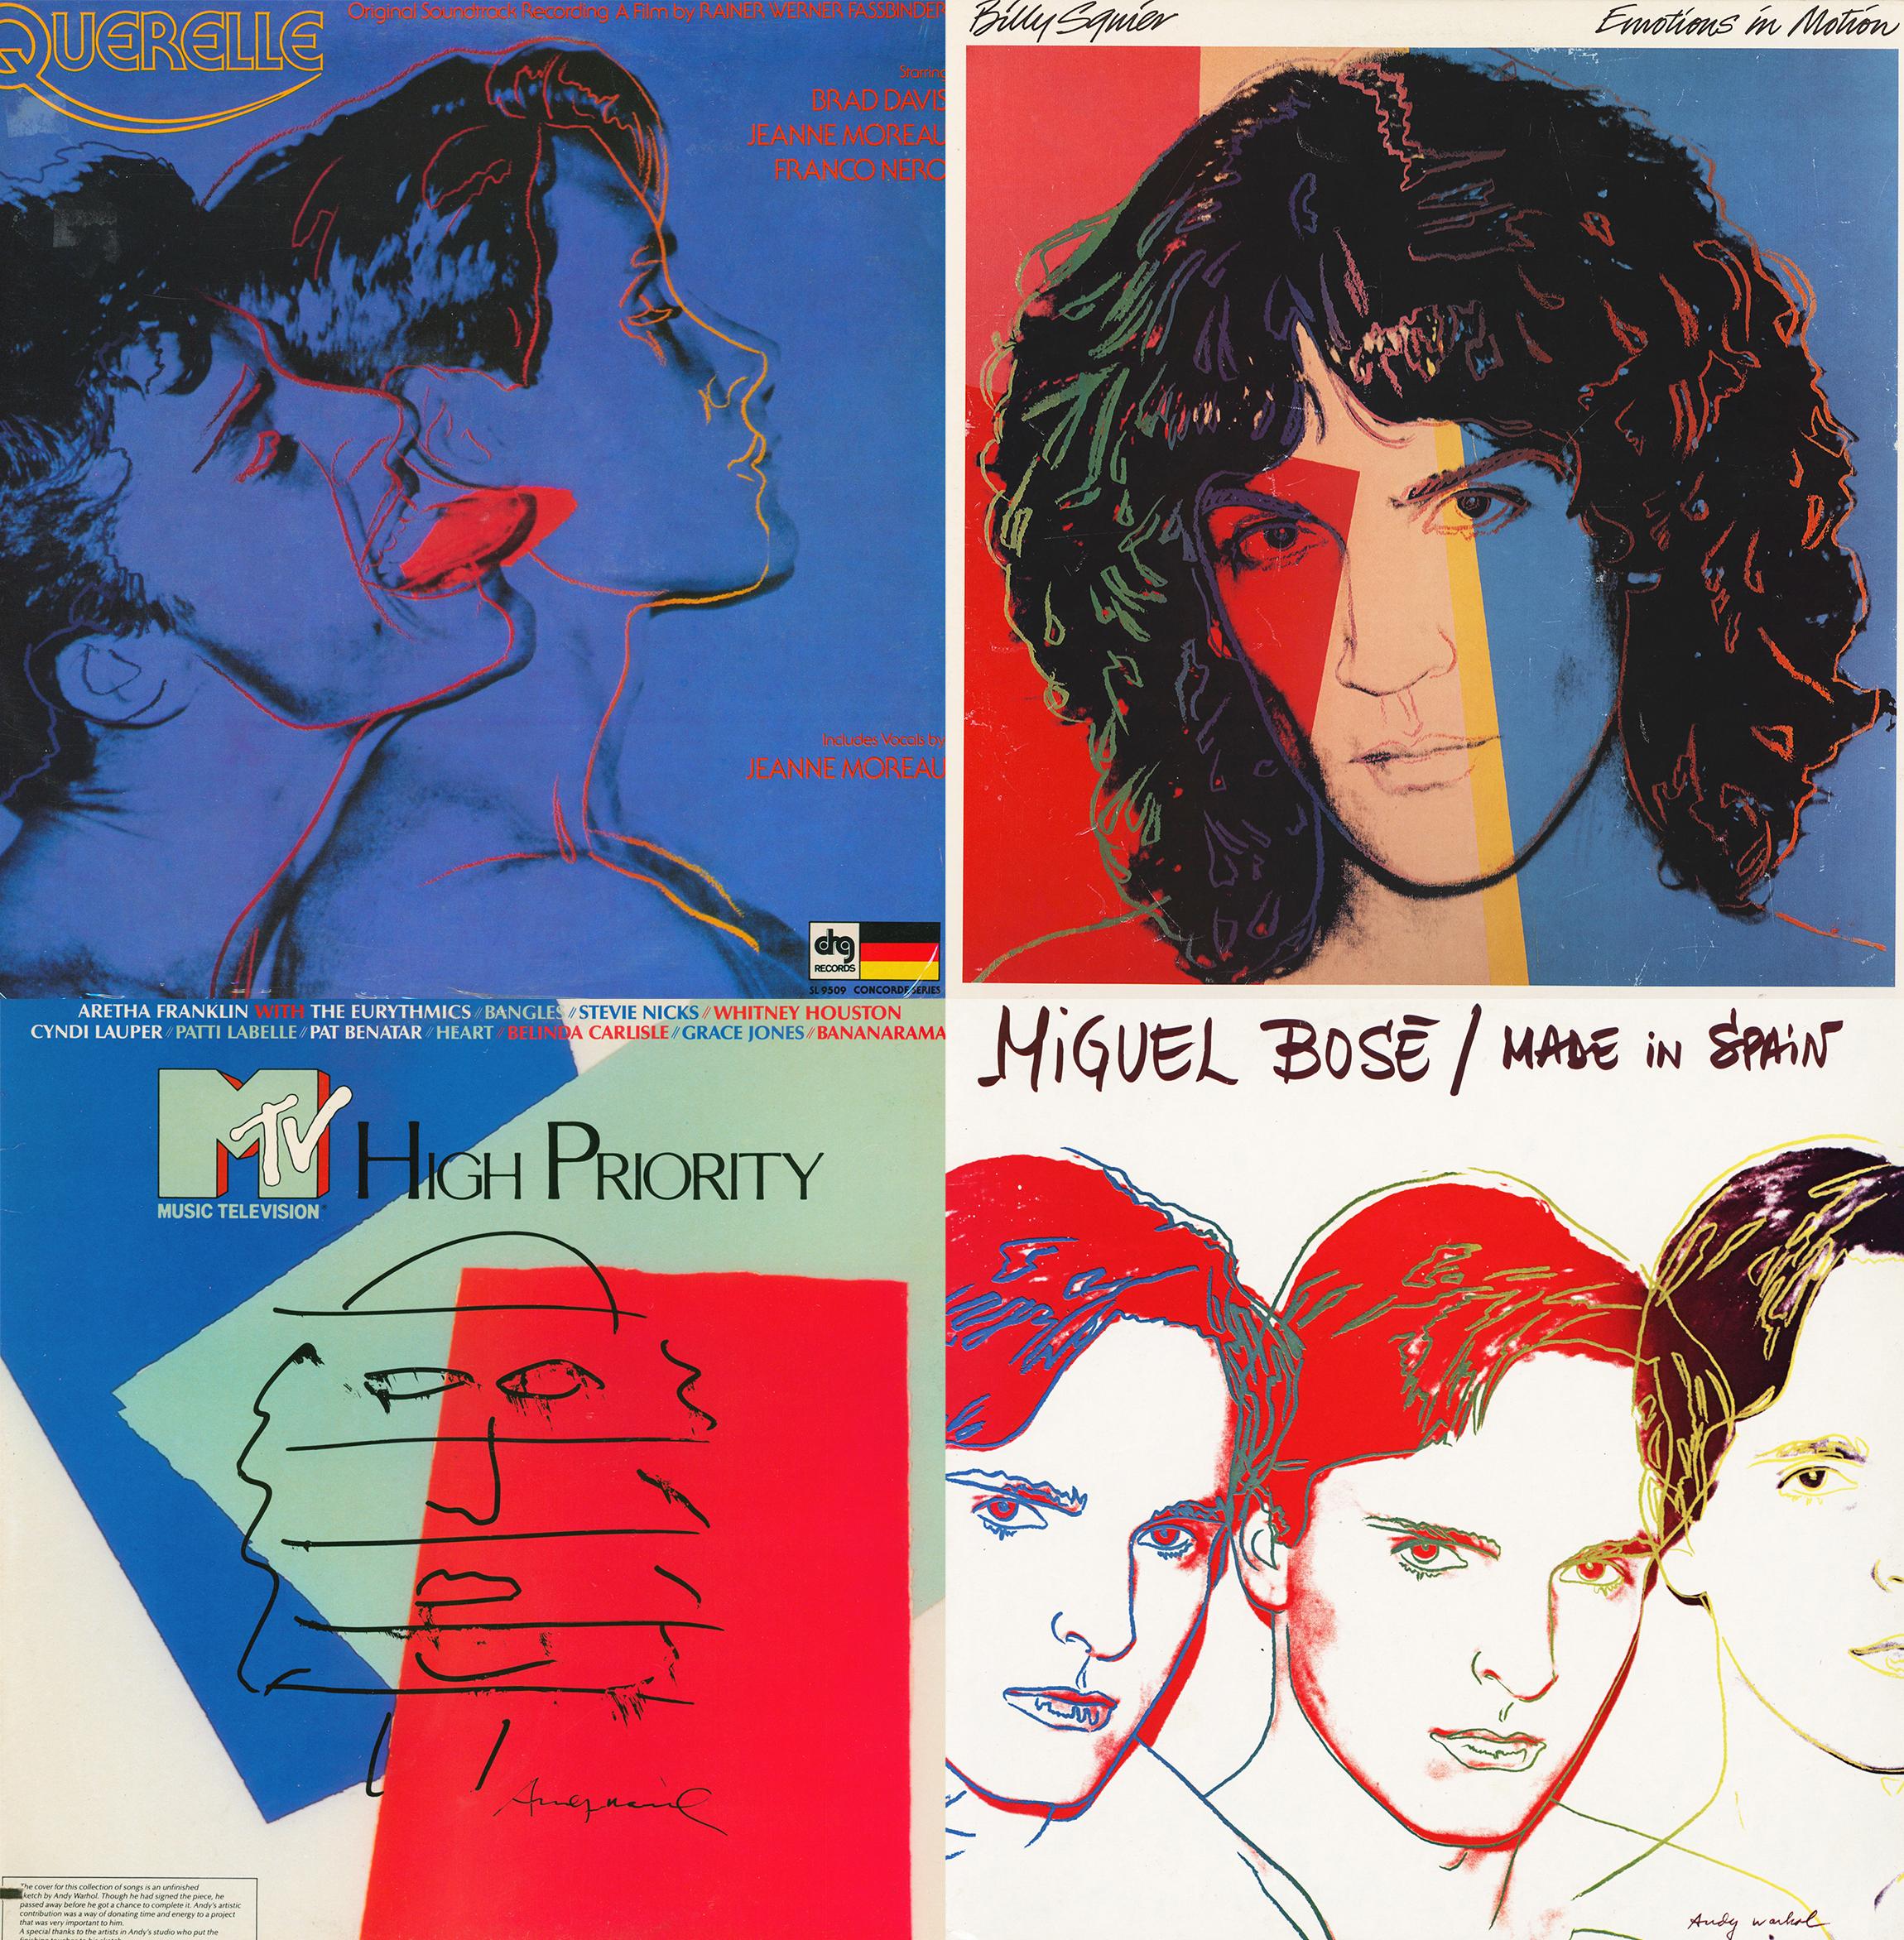 Andy Warhol Designed Record Covers (Set of 4 LPs)